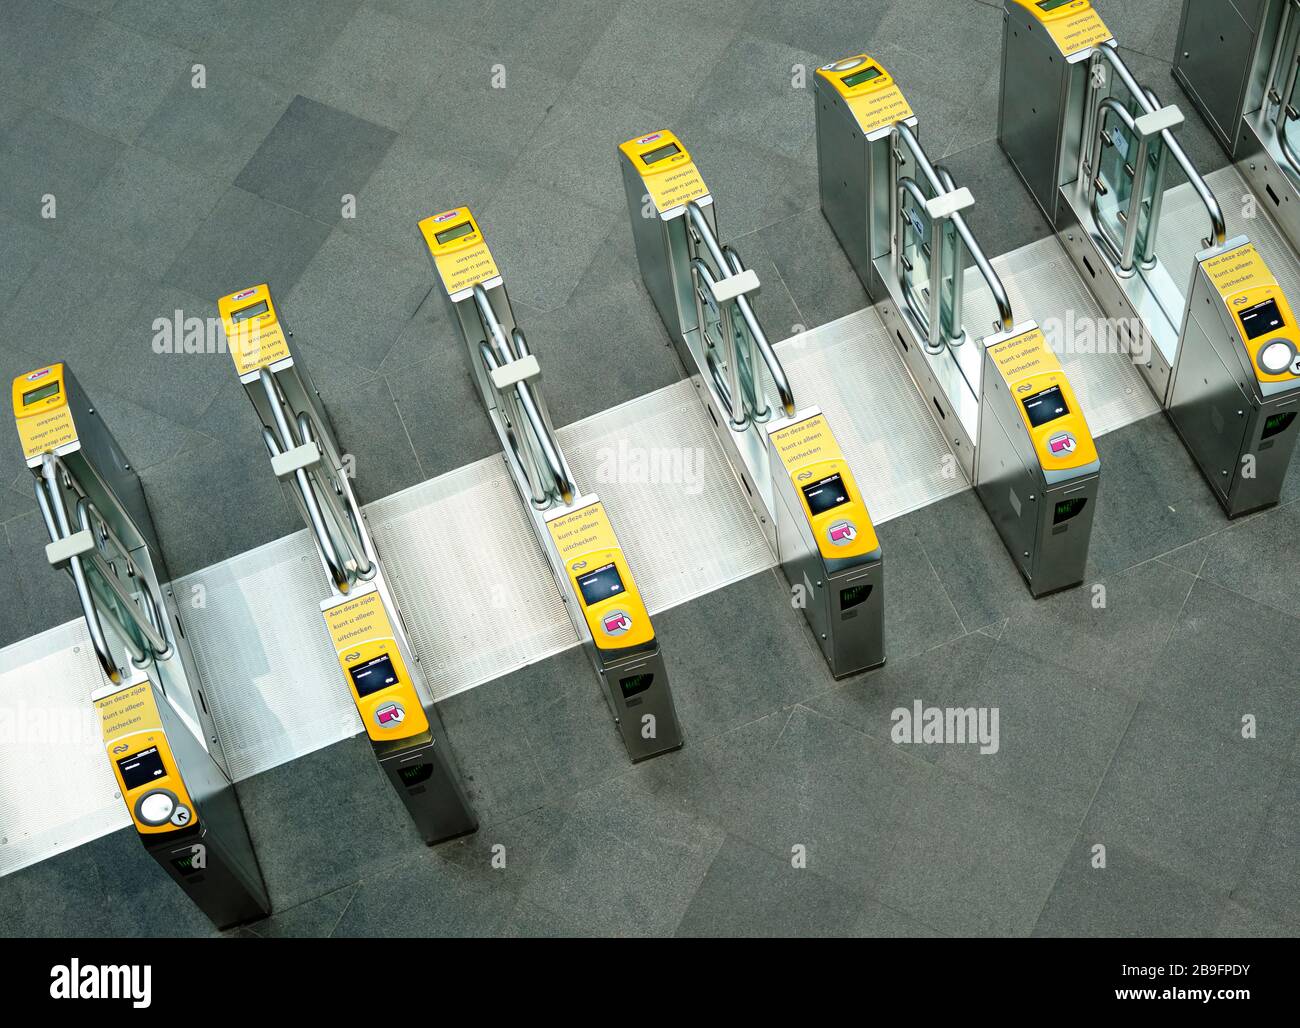 Acces gates where you can scan your card to get to the public transport facilities. Stock Photo